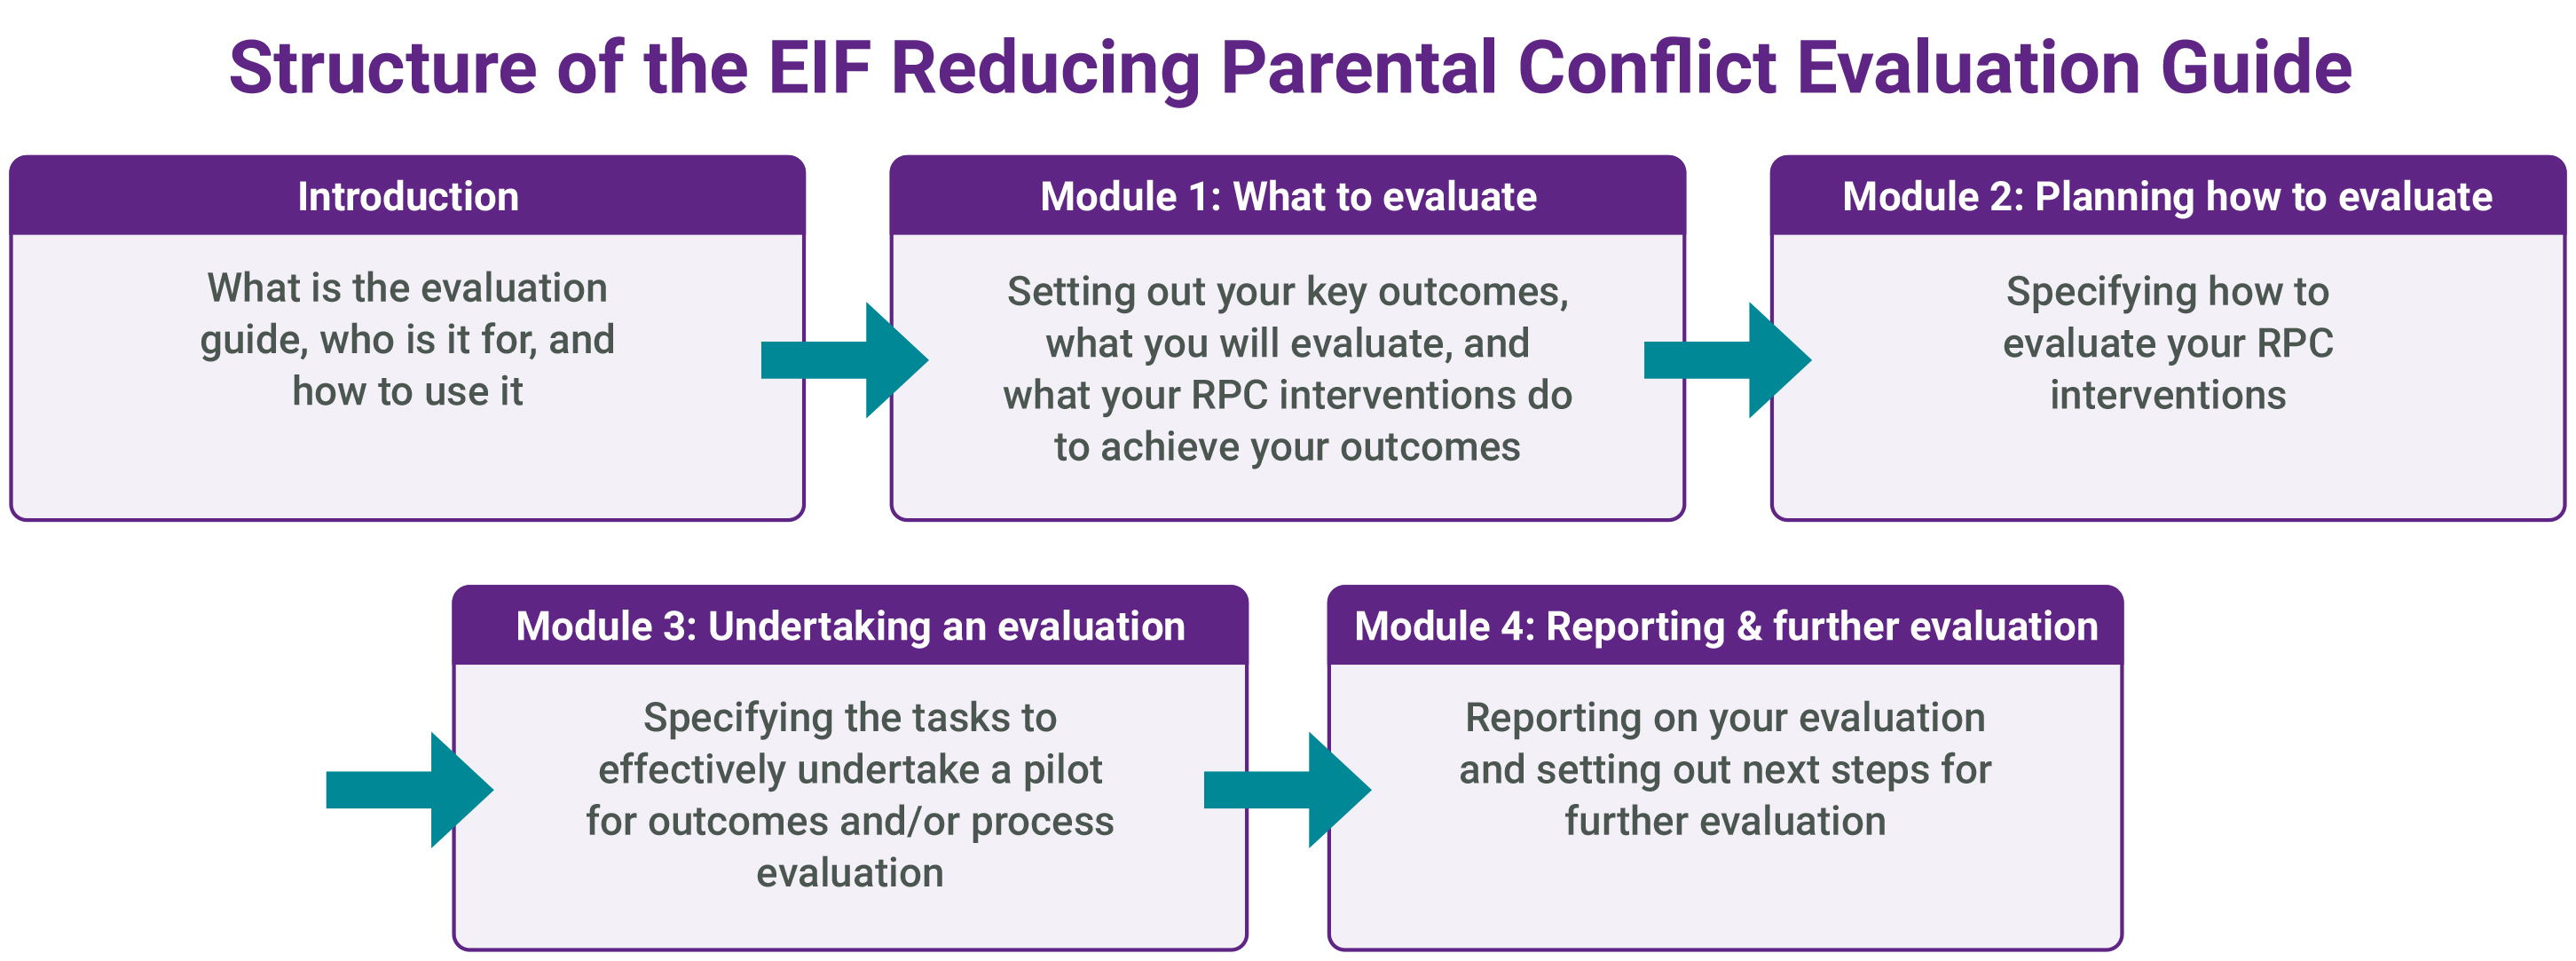 Structure of the EIF evaluation guide: introduction & four modules